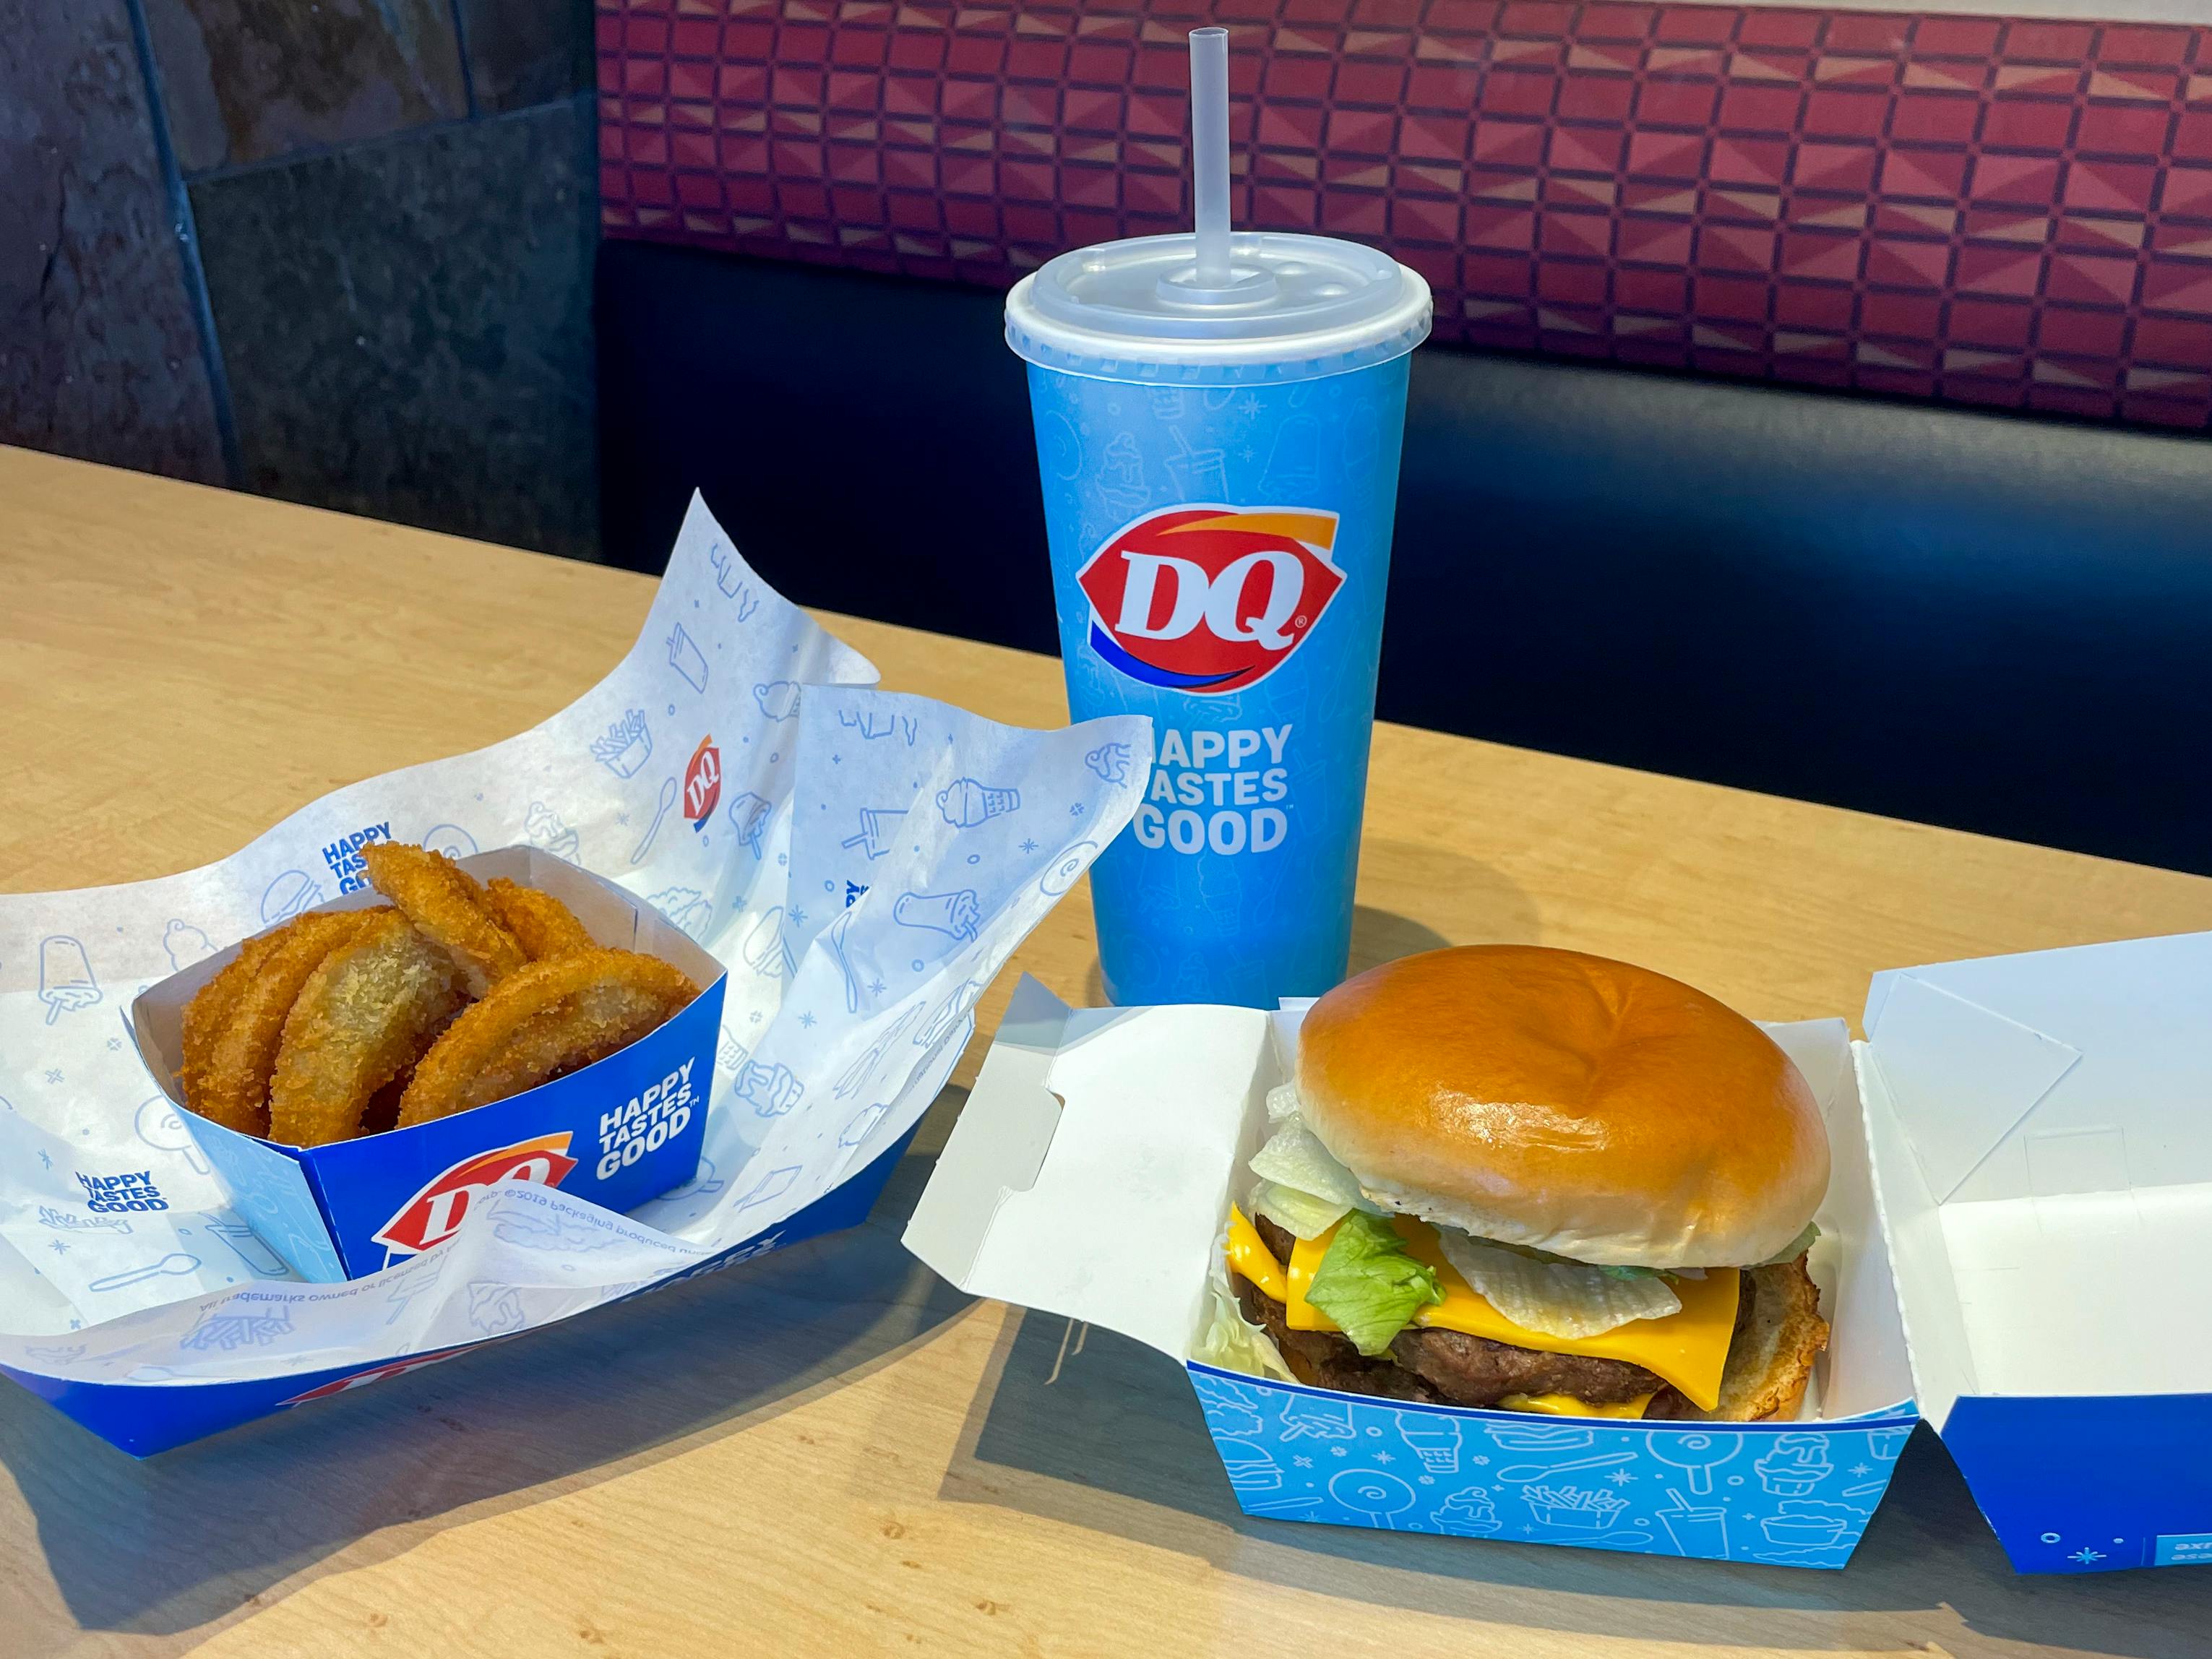 Dairy Queen Onion Rings Review Unwrapping #foodreview - YouTube